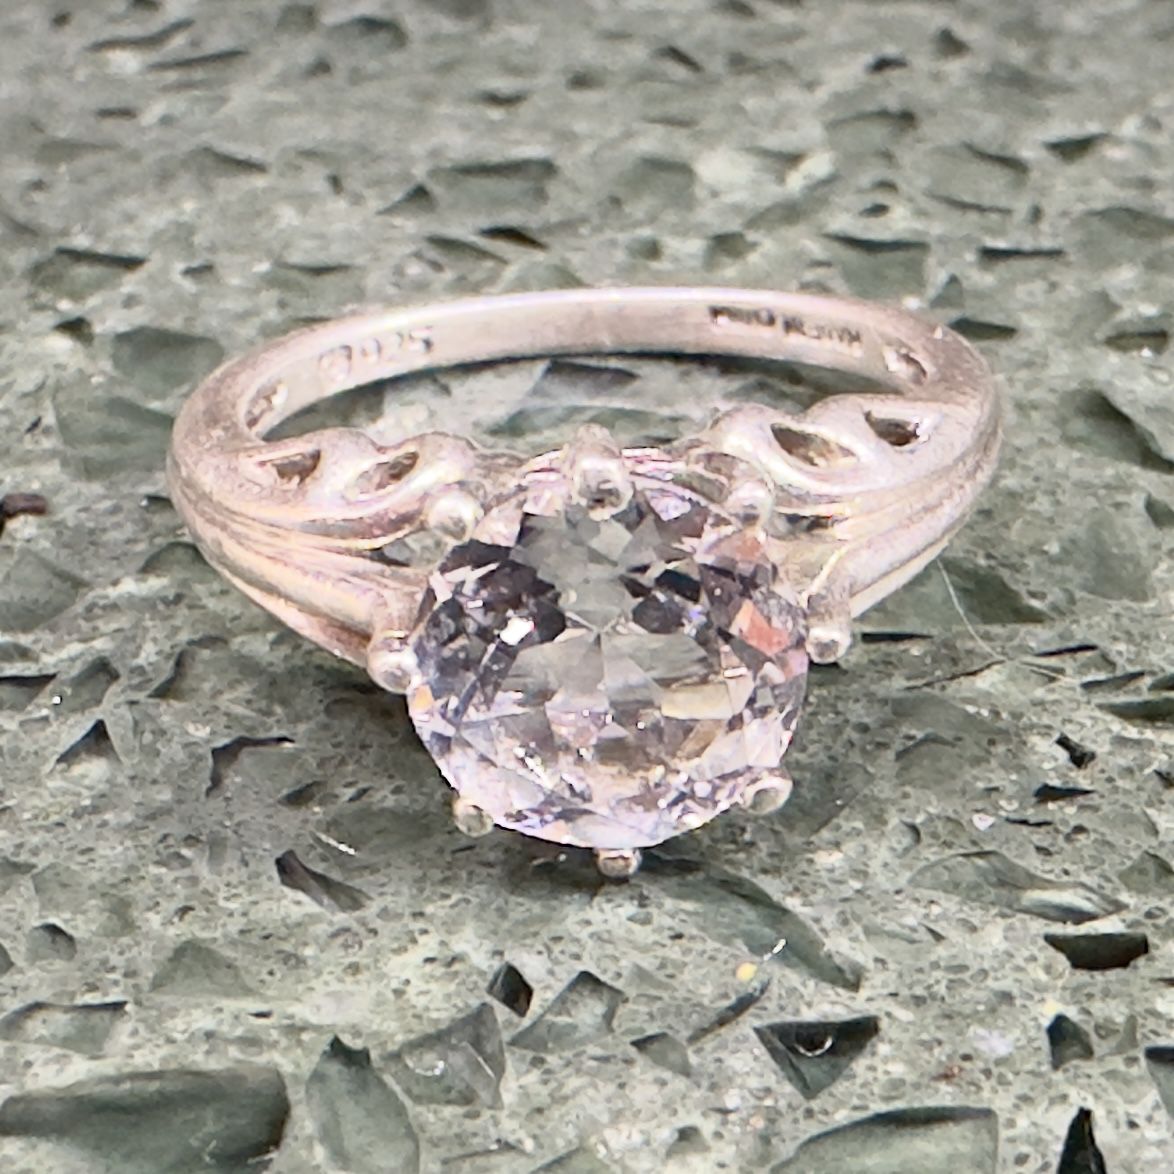 CZ Silver Ring Size 6